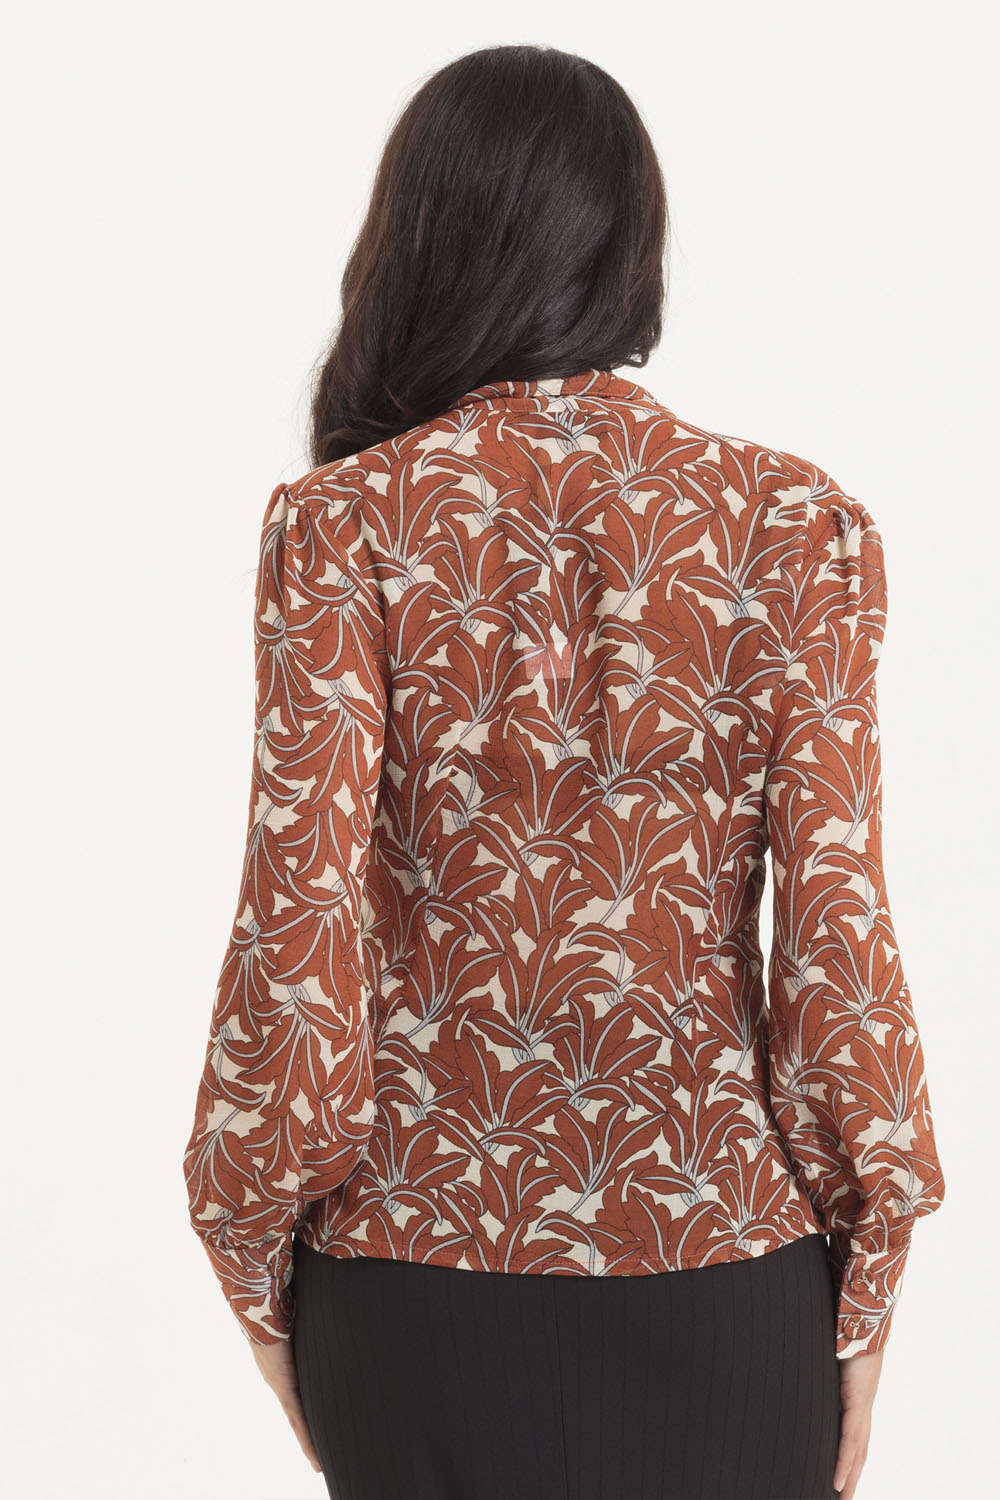 Madeline 40s Style Brown Floral Blouse